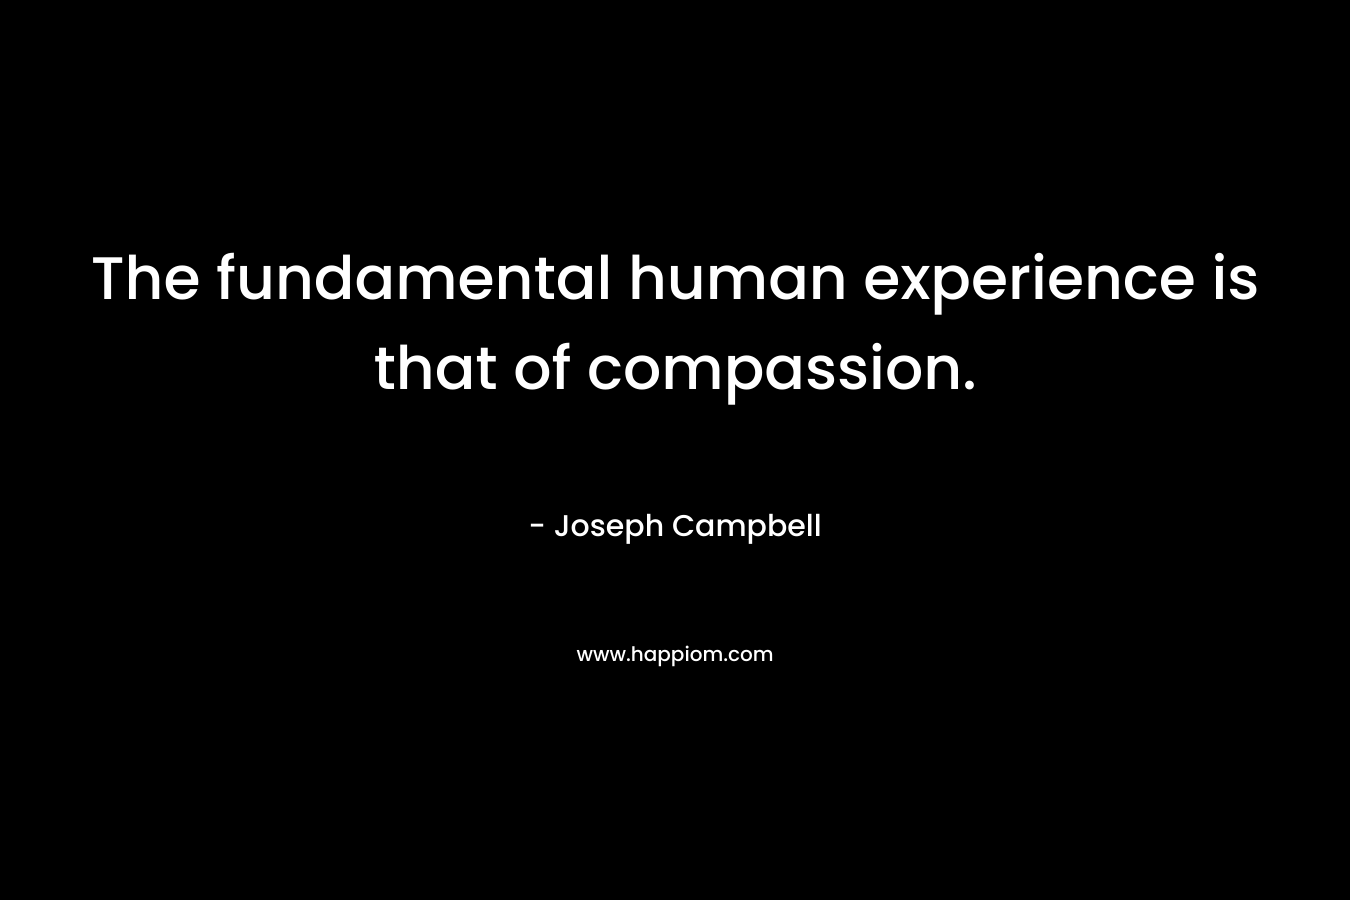 The fundamental human experience is that of compassion. – Joseph Campbell